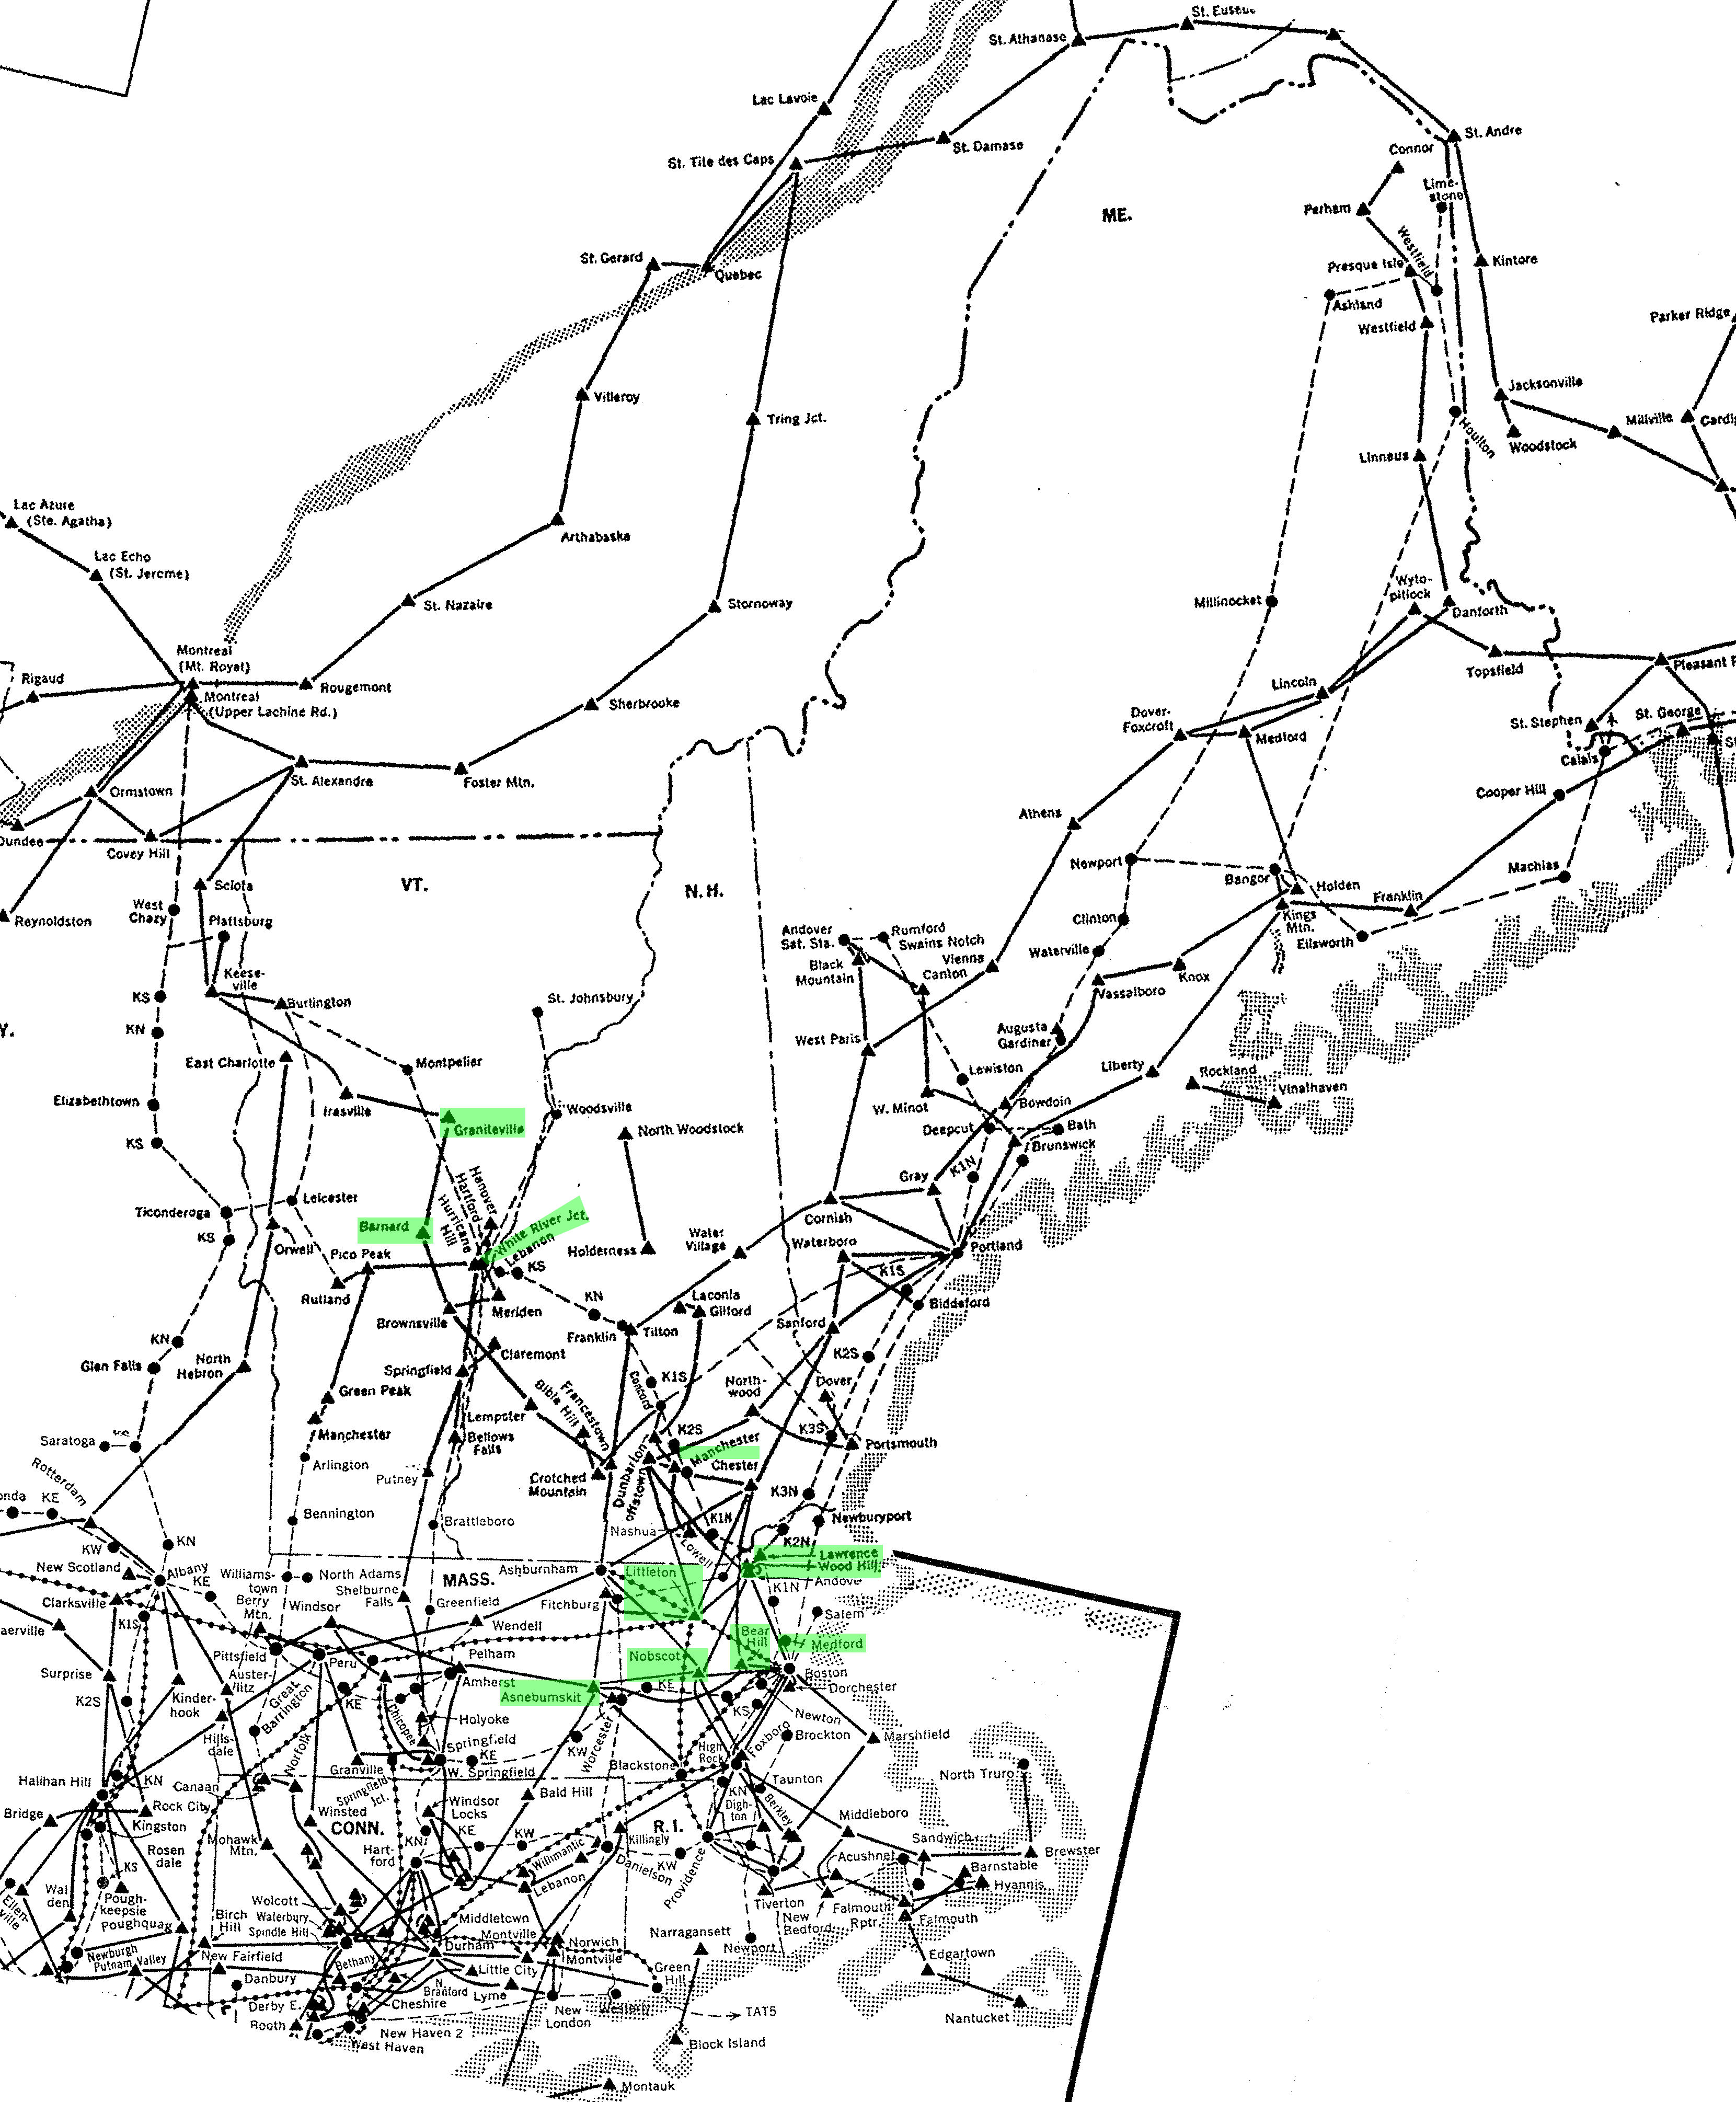 a map of AT&T/Bell Long Lines towers in New England